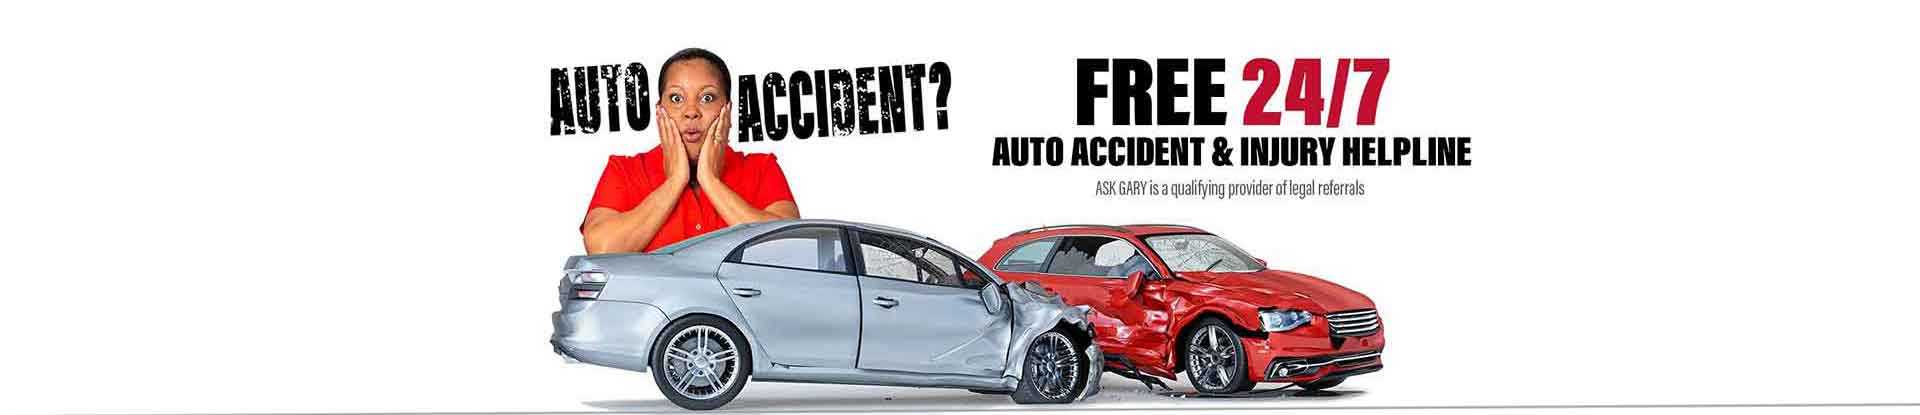 Auto Accident Ask Gary